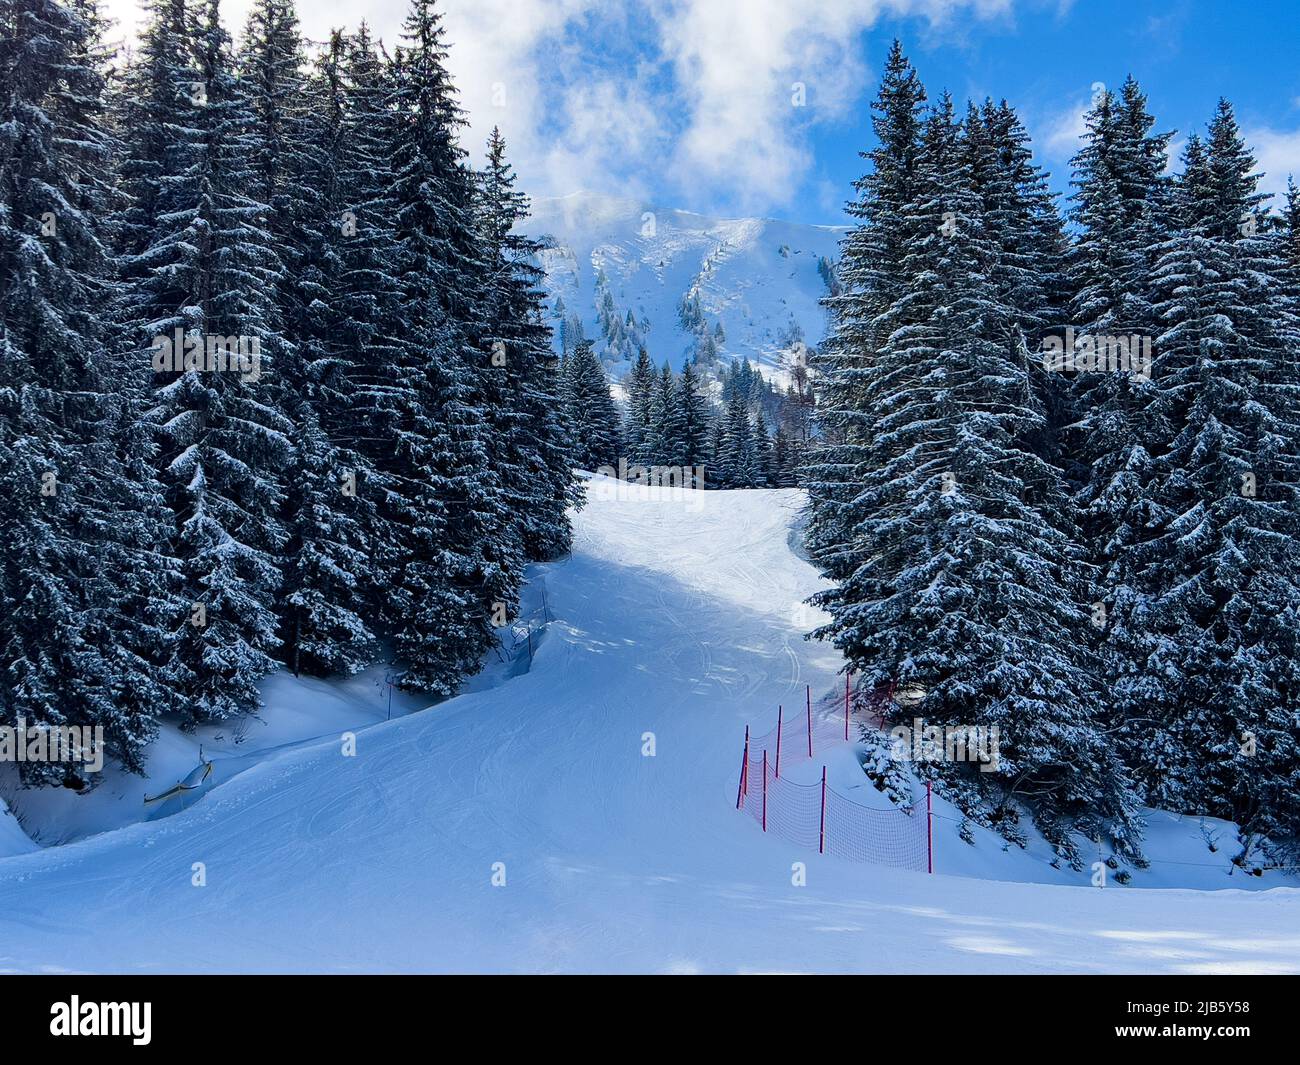 Ski track at alpine resort in fir tree forest covered with snow Stock Photo